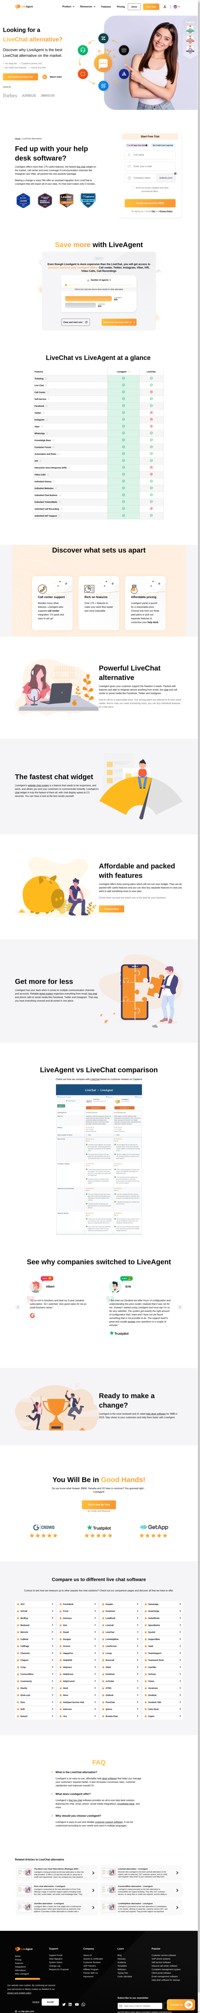 LiveAgent offers more than 175 useful features, the fastest live chat widget on the market. Call center and even coverage of channels like Instagram.